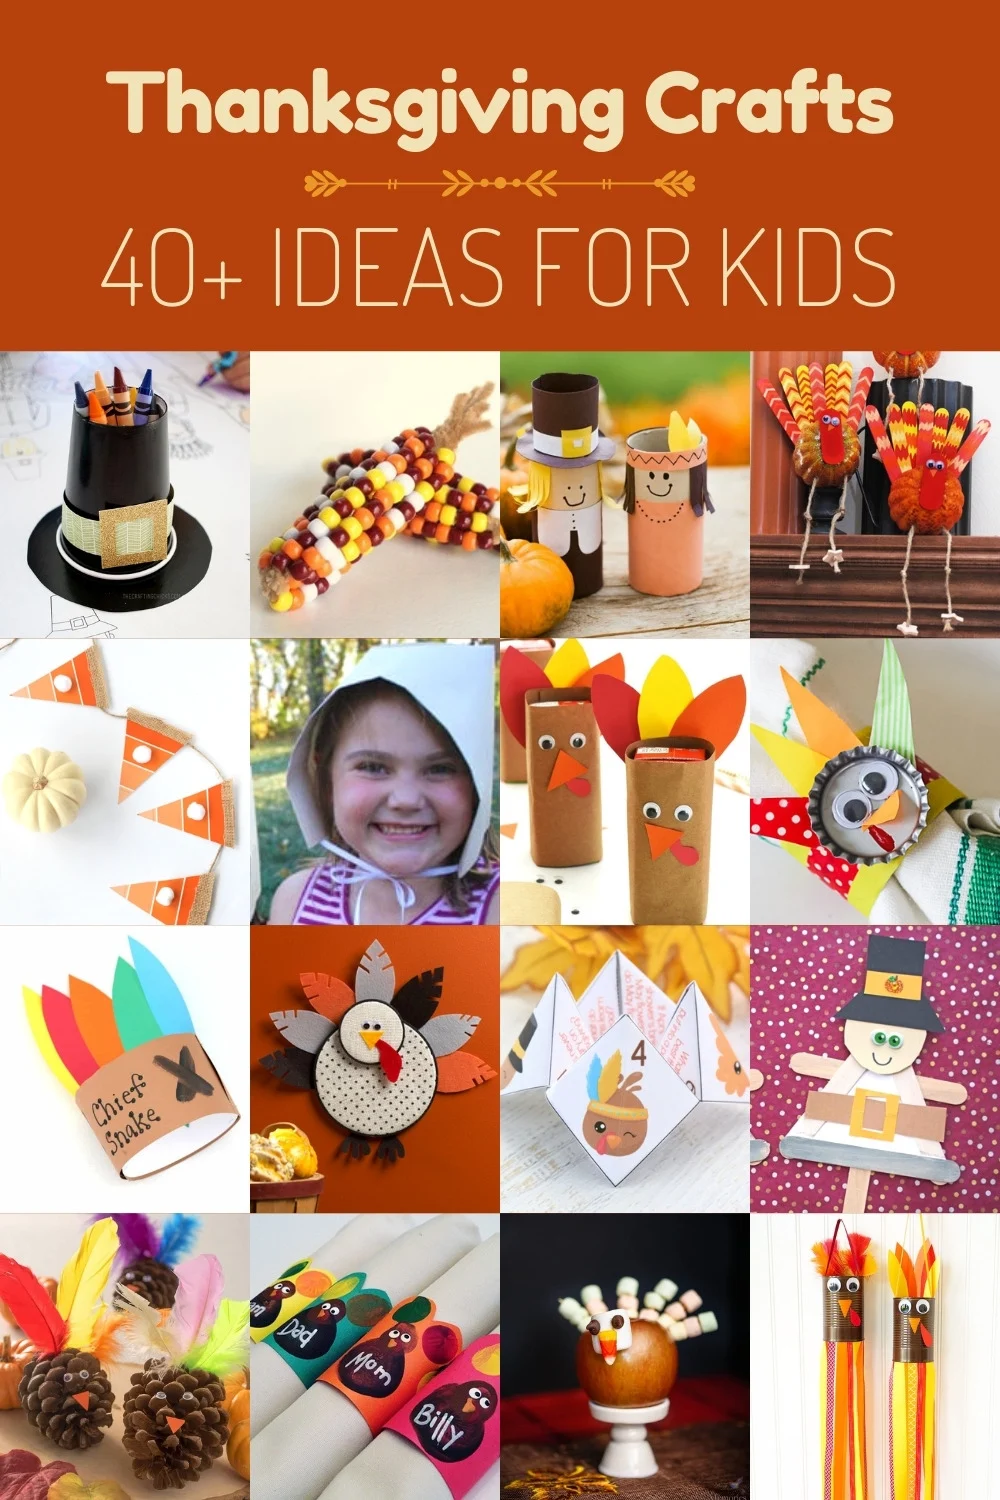 65 Easy Thanksgiving Crafts & DIY Projects for Kids